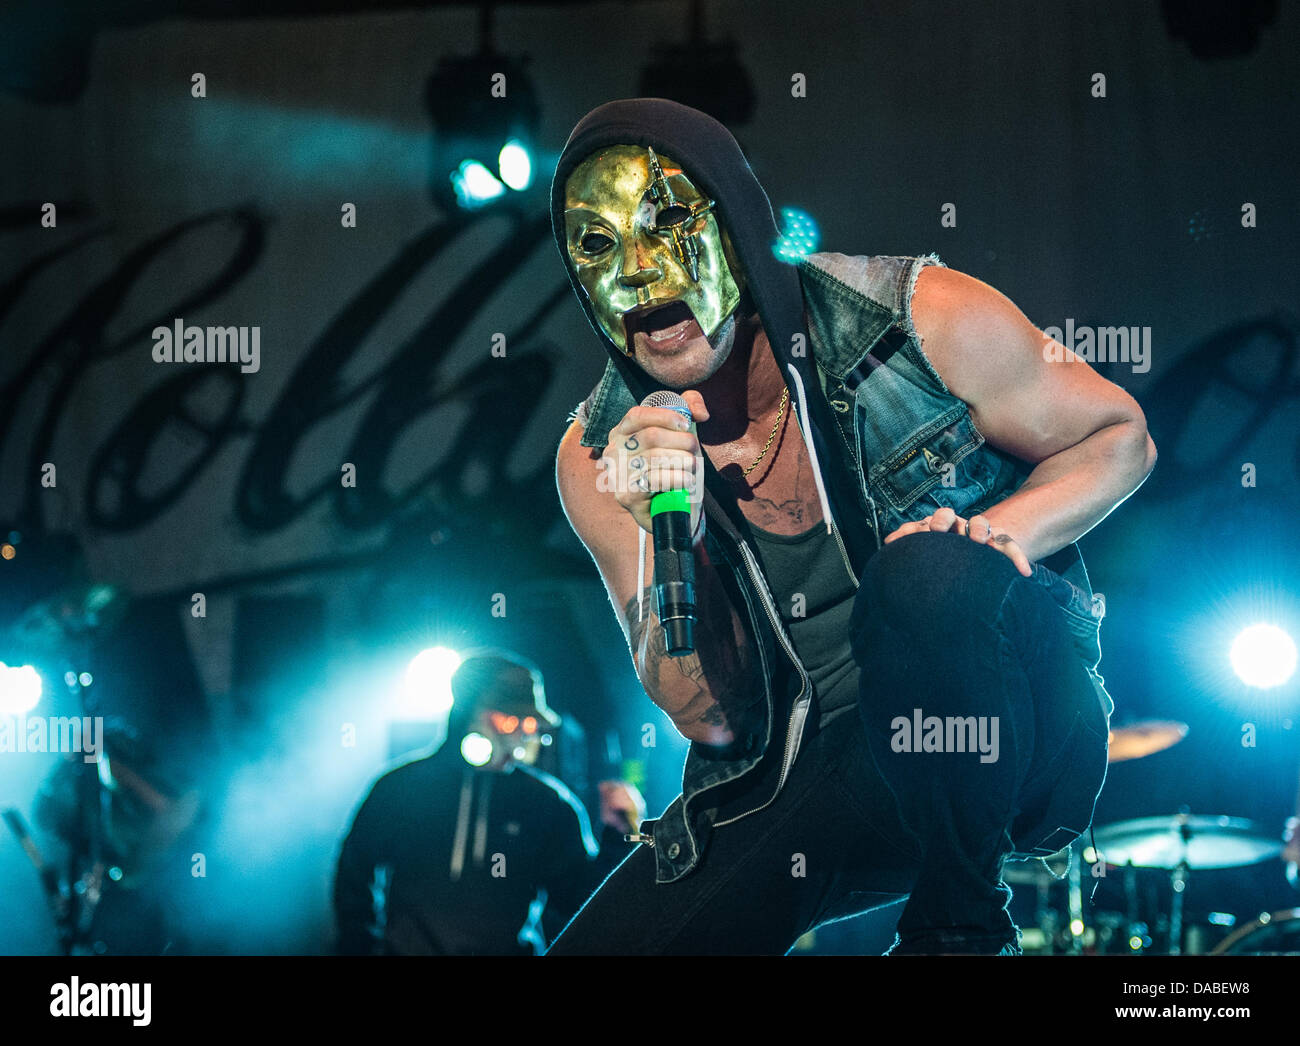 Hollywood Undead performing live Foto Stock